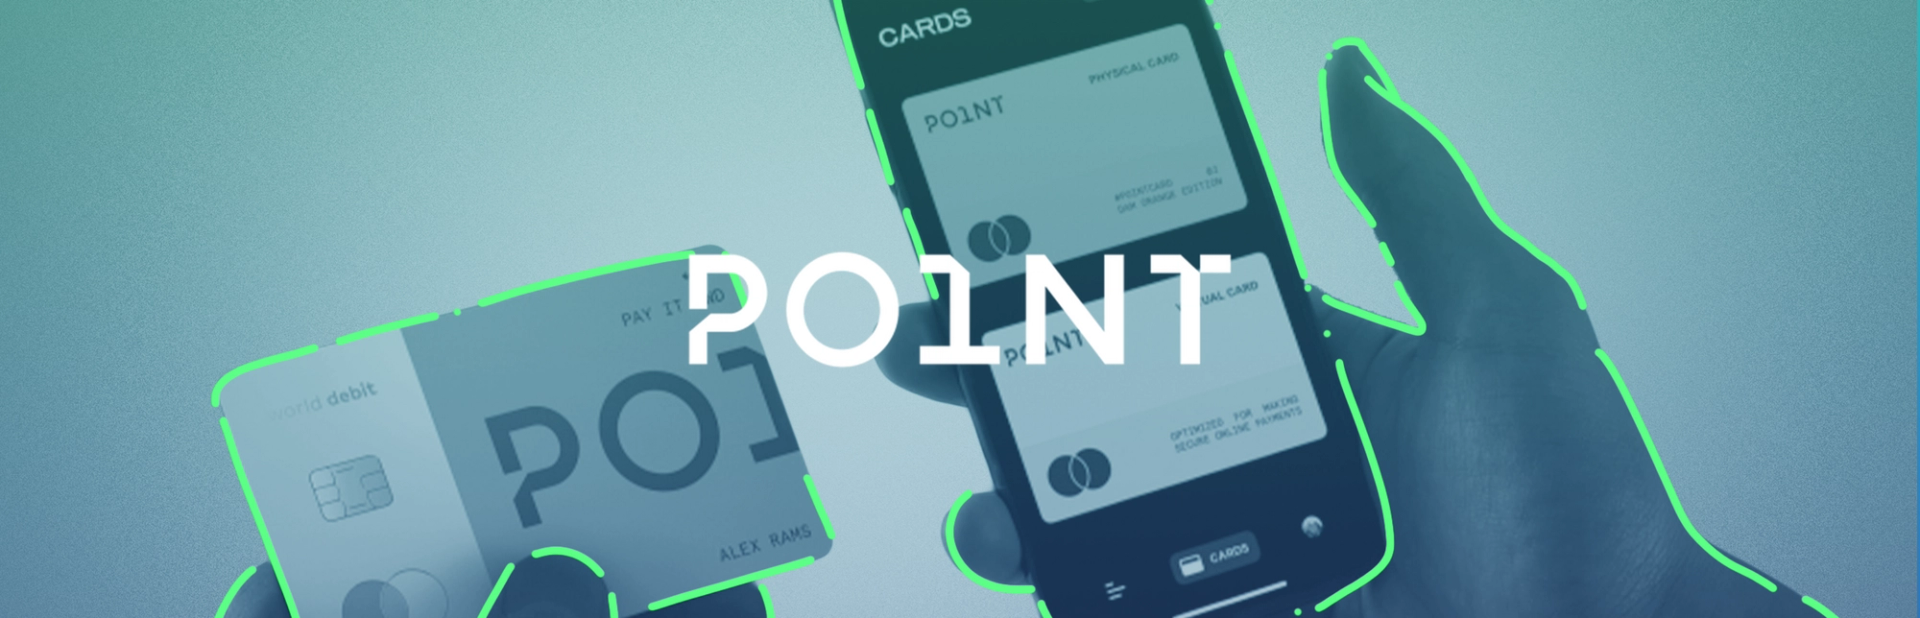 How PointCard Increased CTR 3.5X With Social Ads